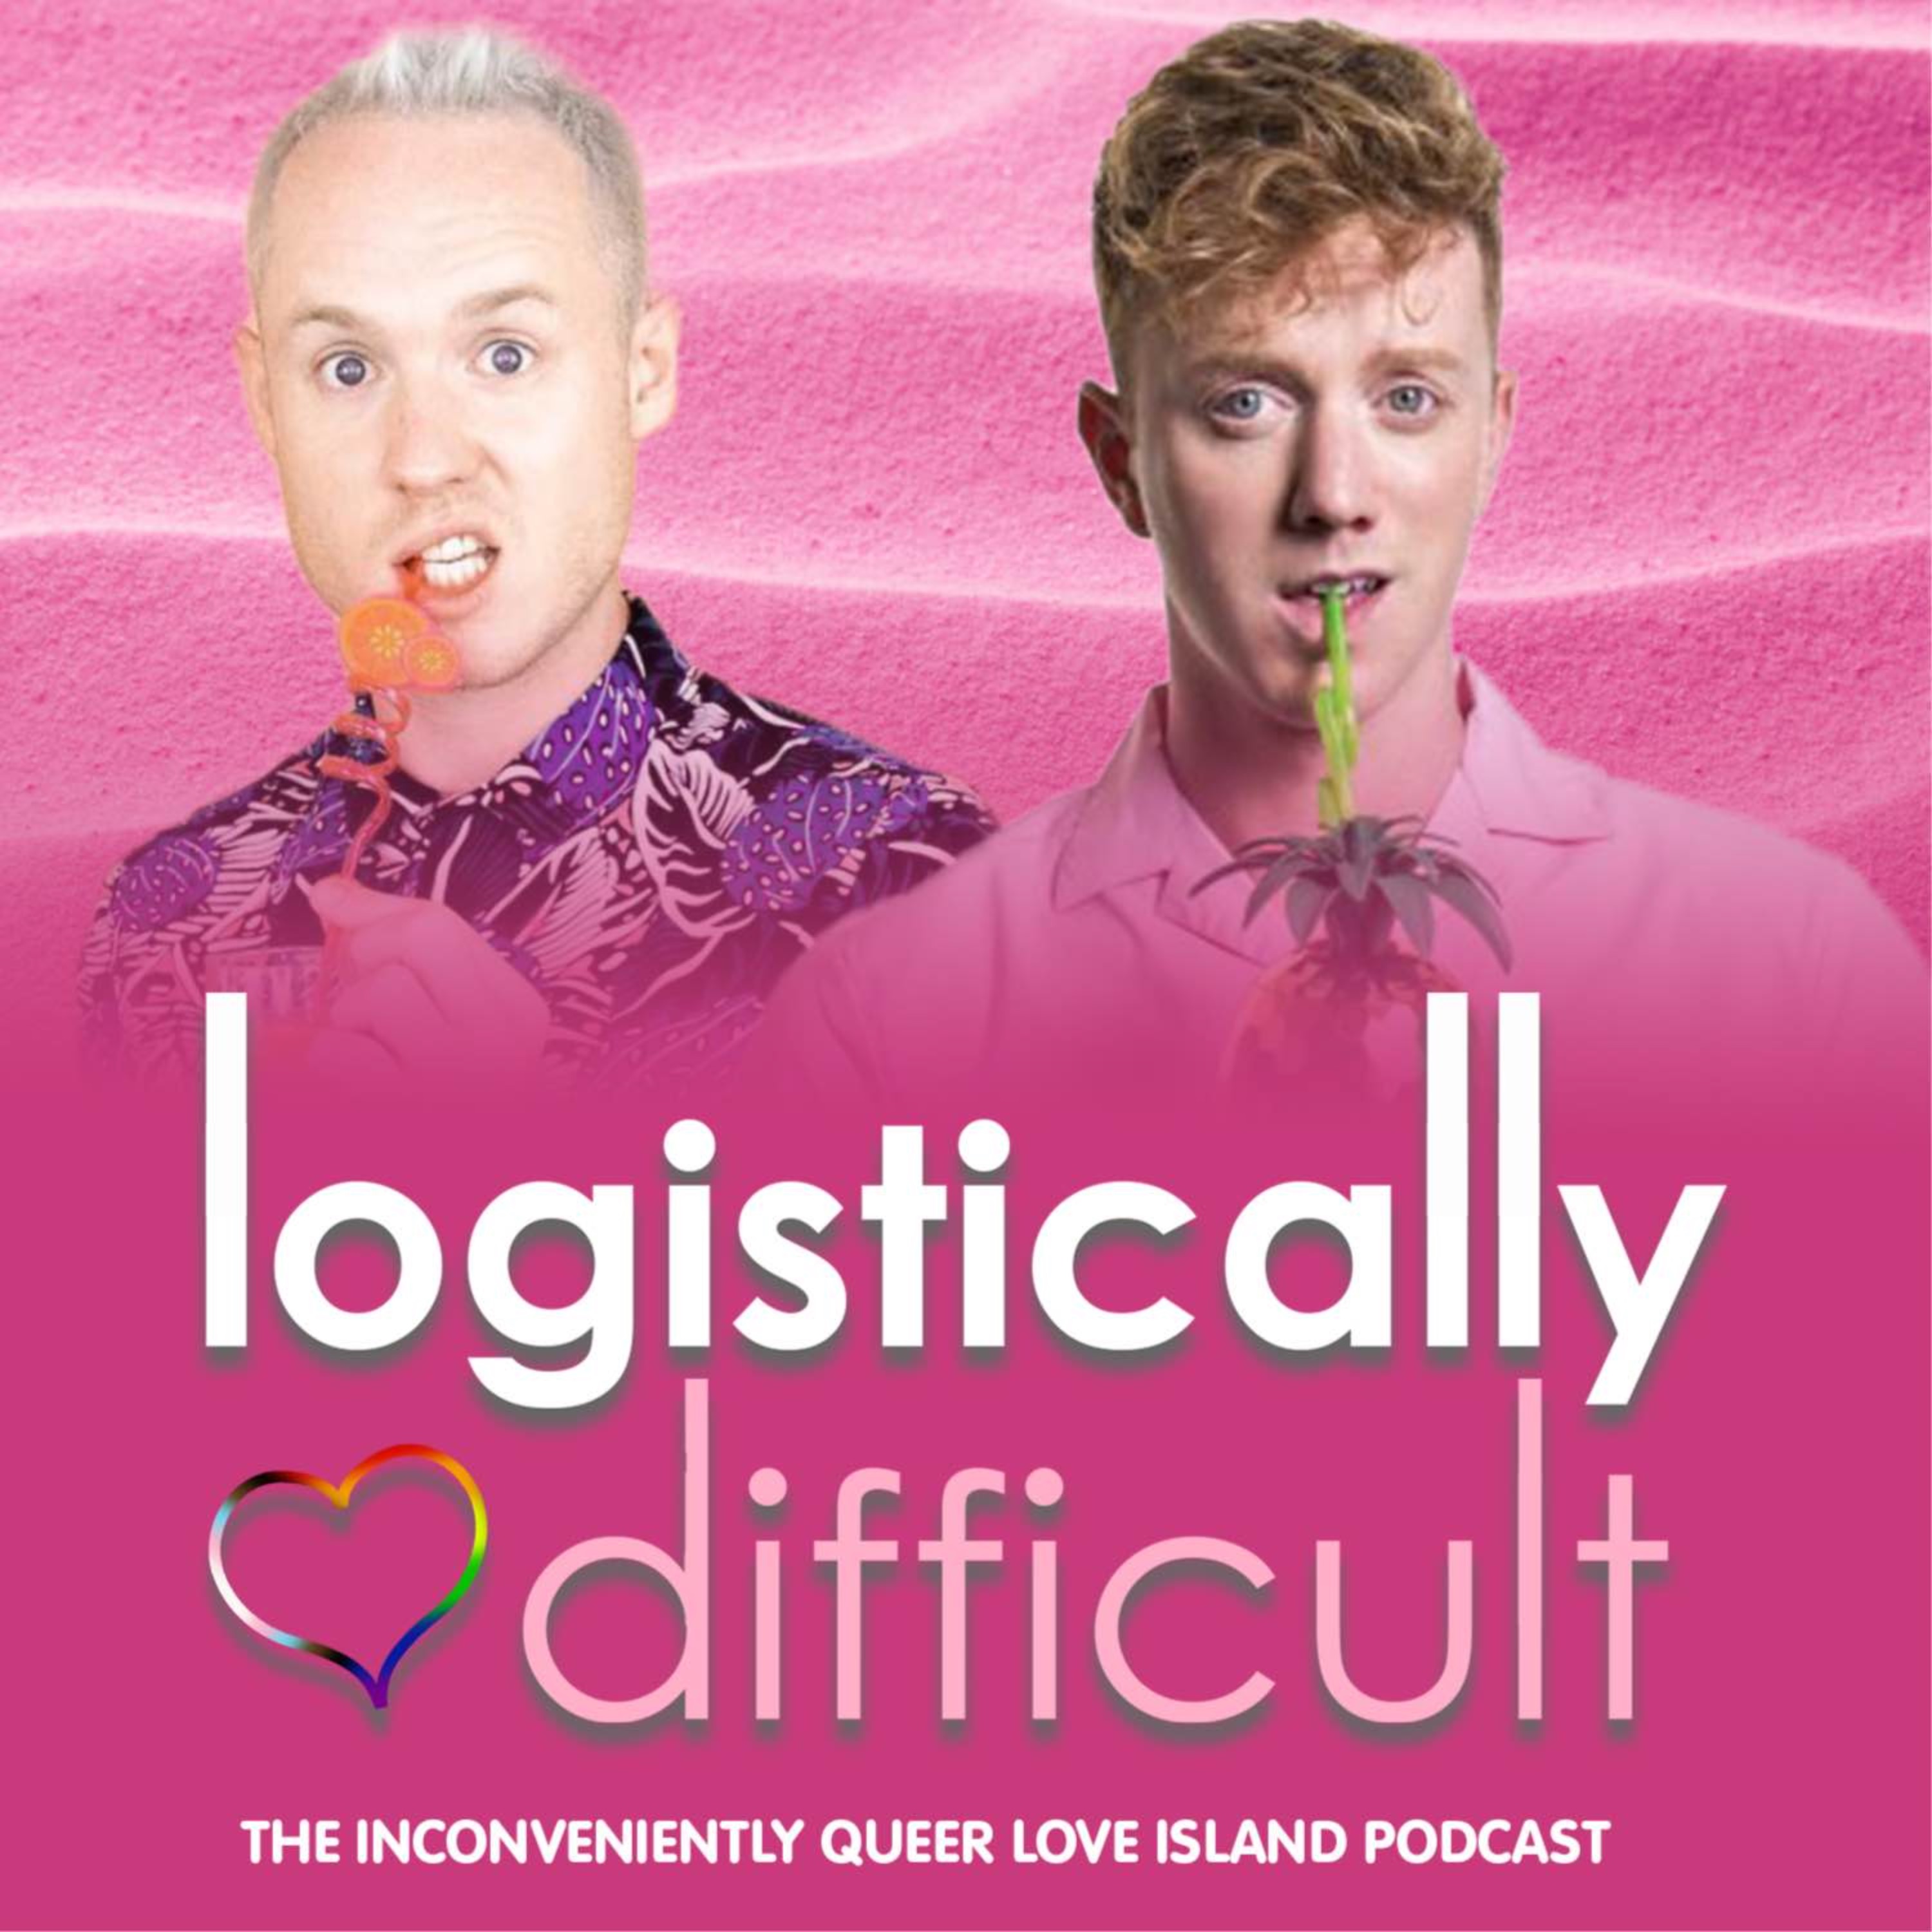 Logistically Difficult: The Inconveniently Queer Love Island Podcast